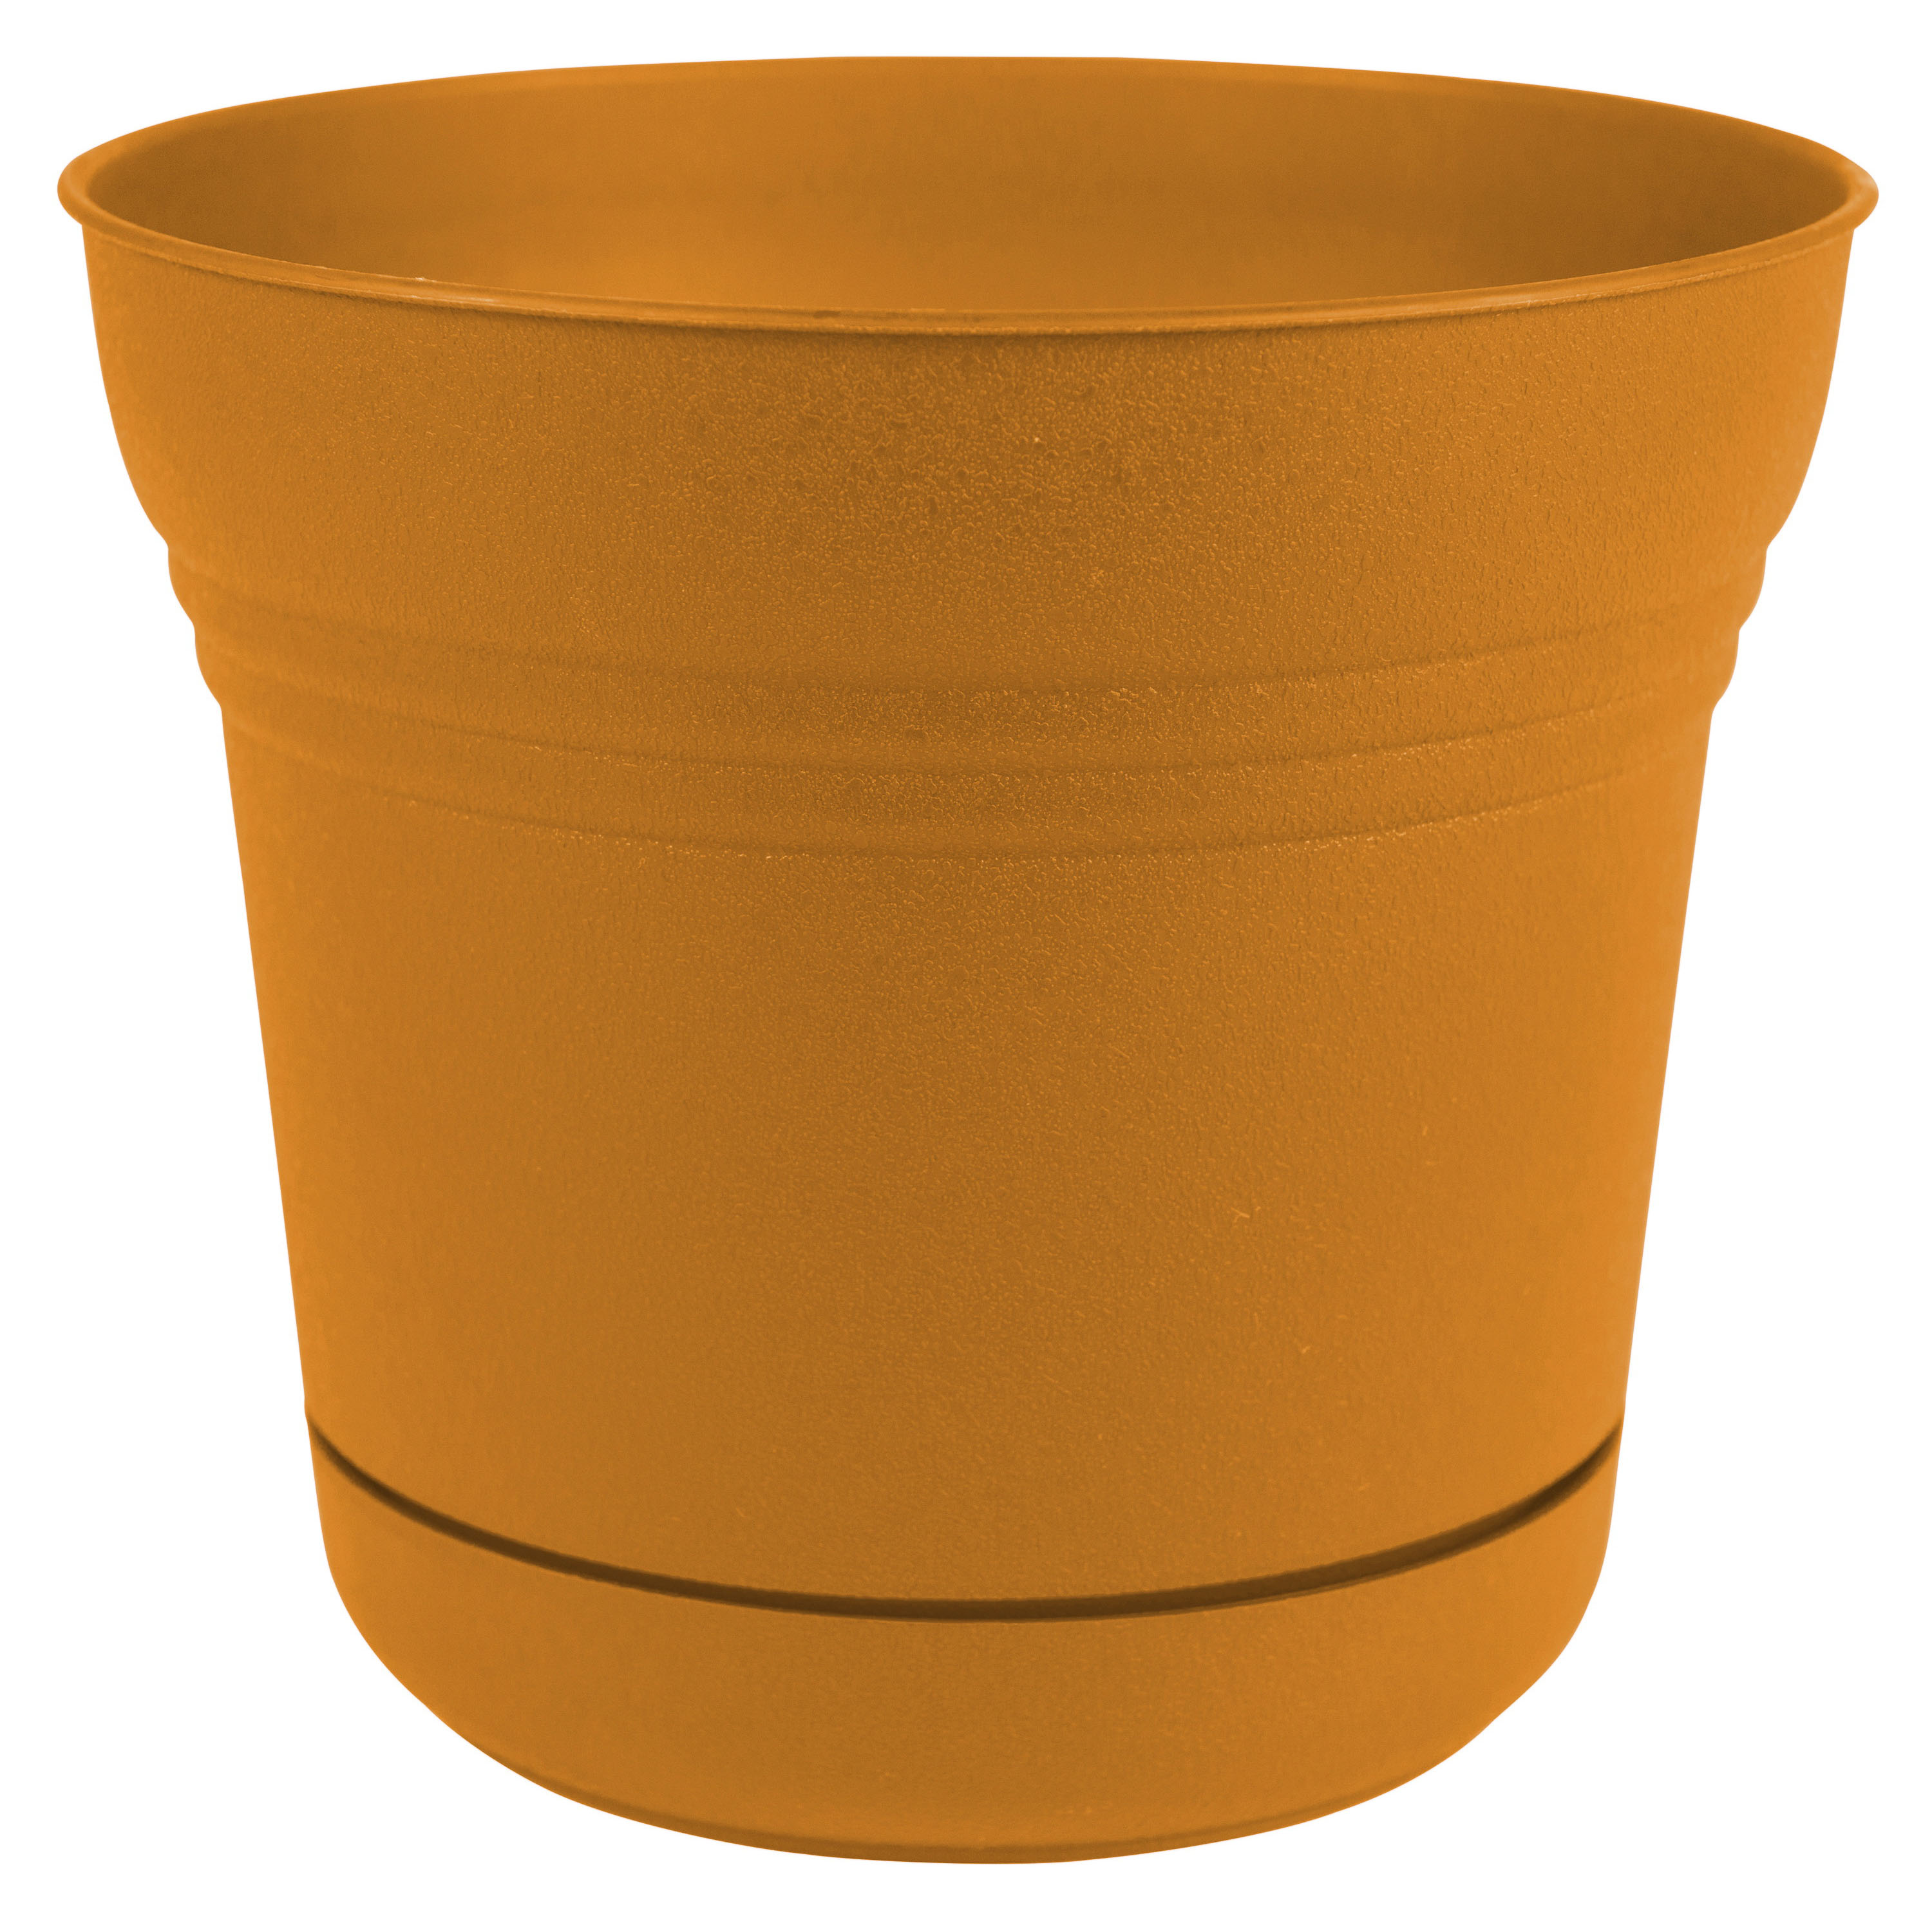 SP0523 Planter, 5 in Dia, 4-1/2 in H, 5 in W, Saturn Design, Earthy Yellow, Matte